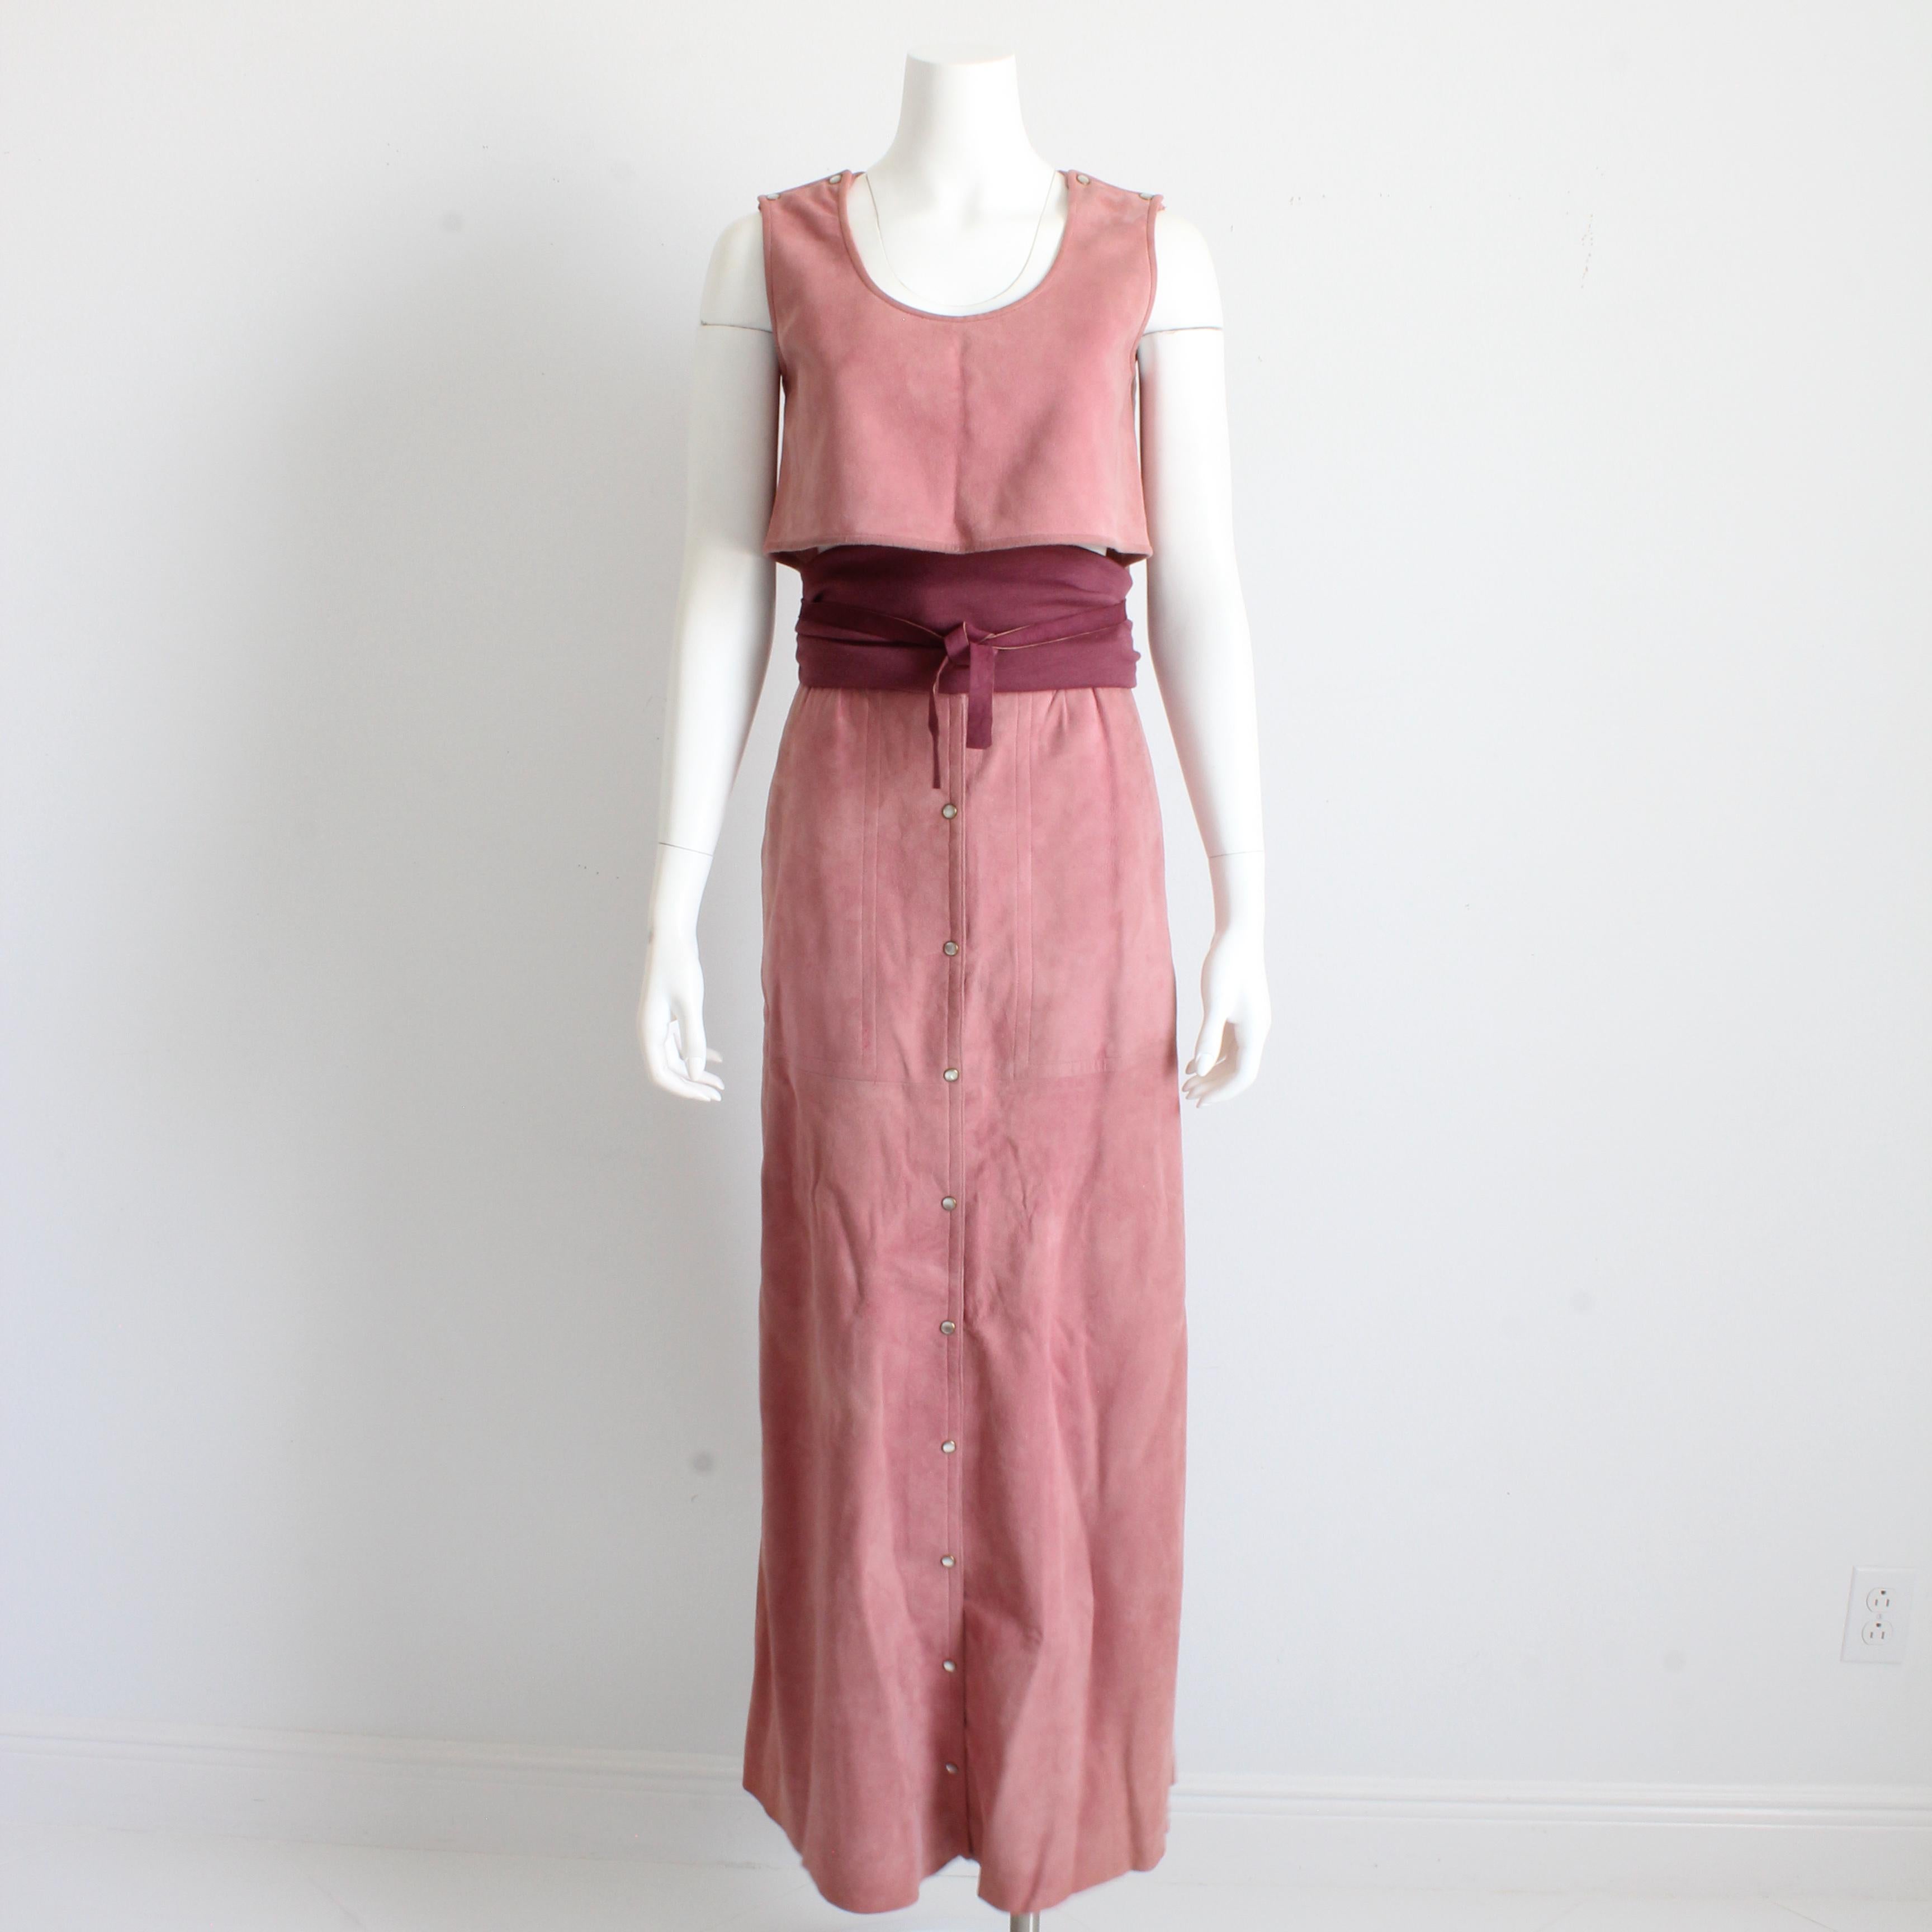 Vintage and rare Bonnie Cashin for Sills 3pc Skirt Set, likely made in the early 70s.  

Made from a pale pink chamois suede, the set includes a cropped tank, matching maxi skirt and a dark cranberry wool jersey Obi-style belt with leather wrap